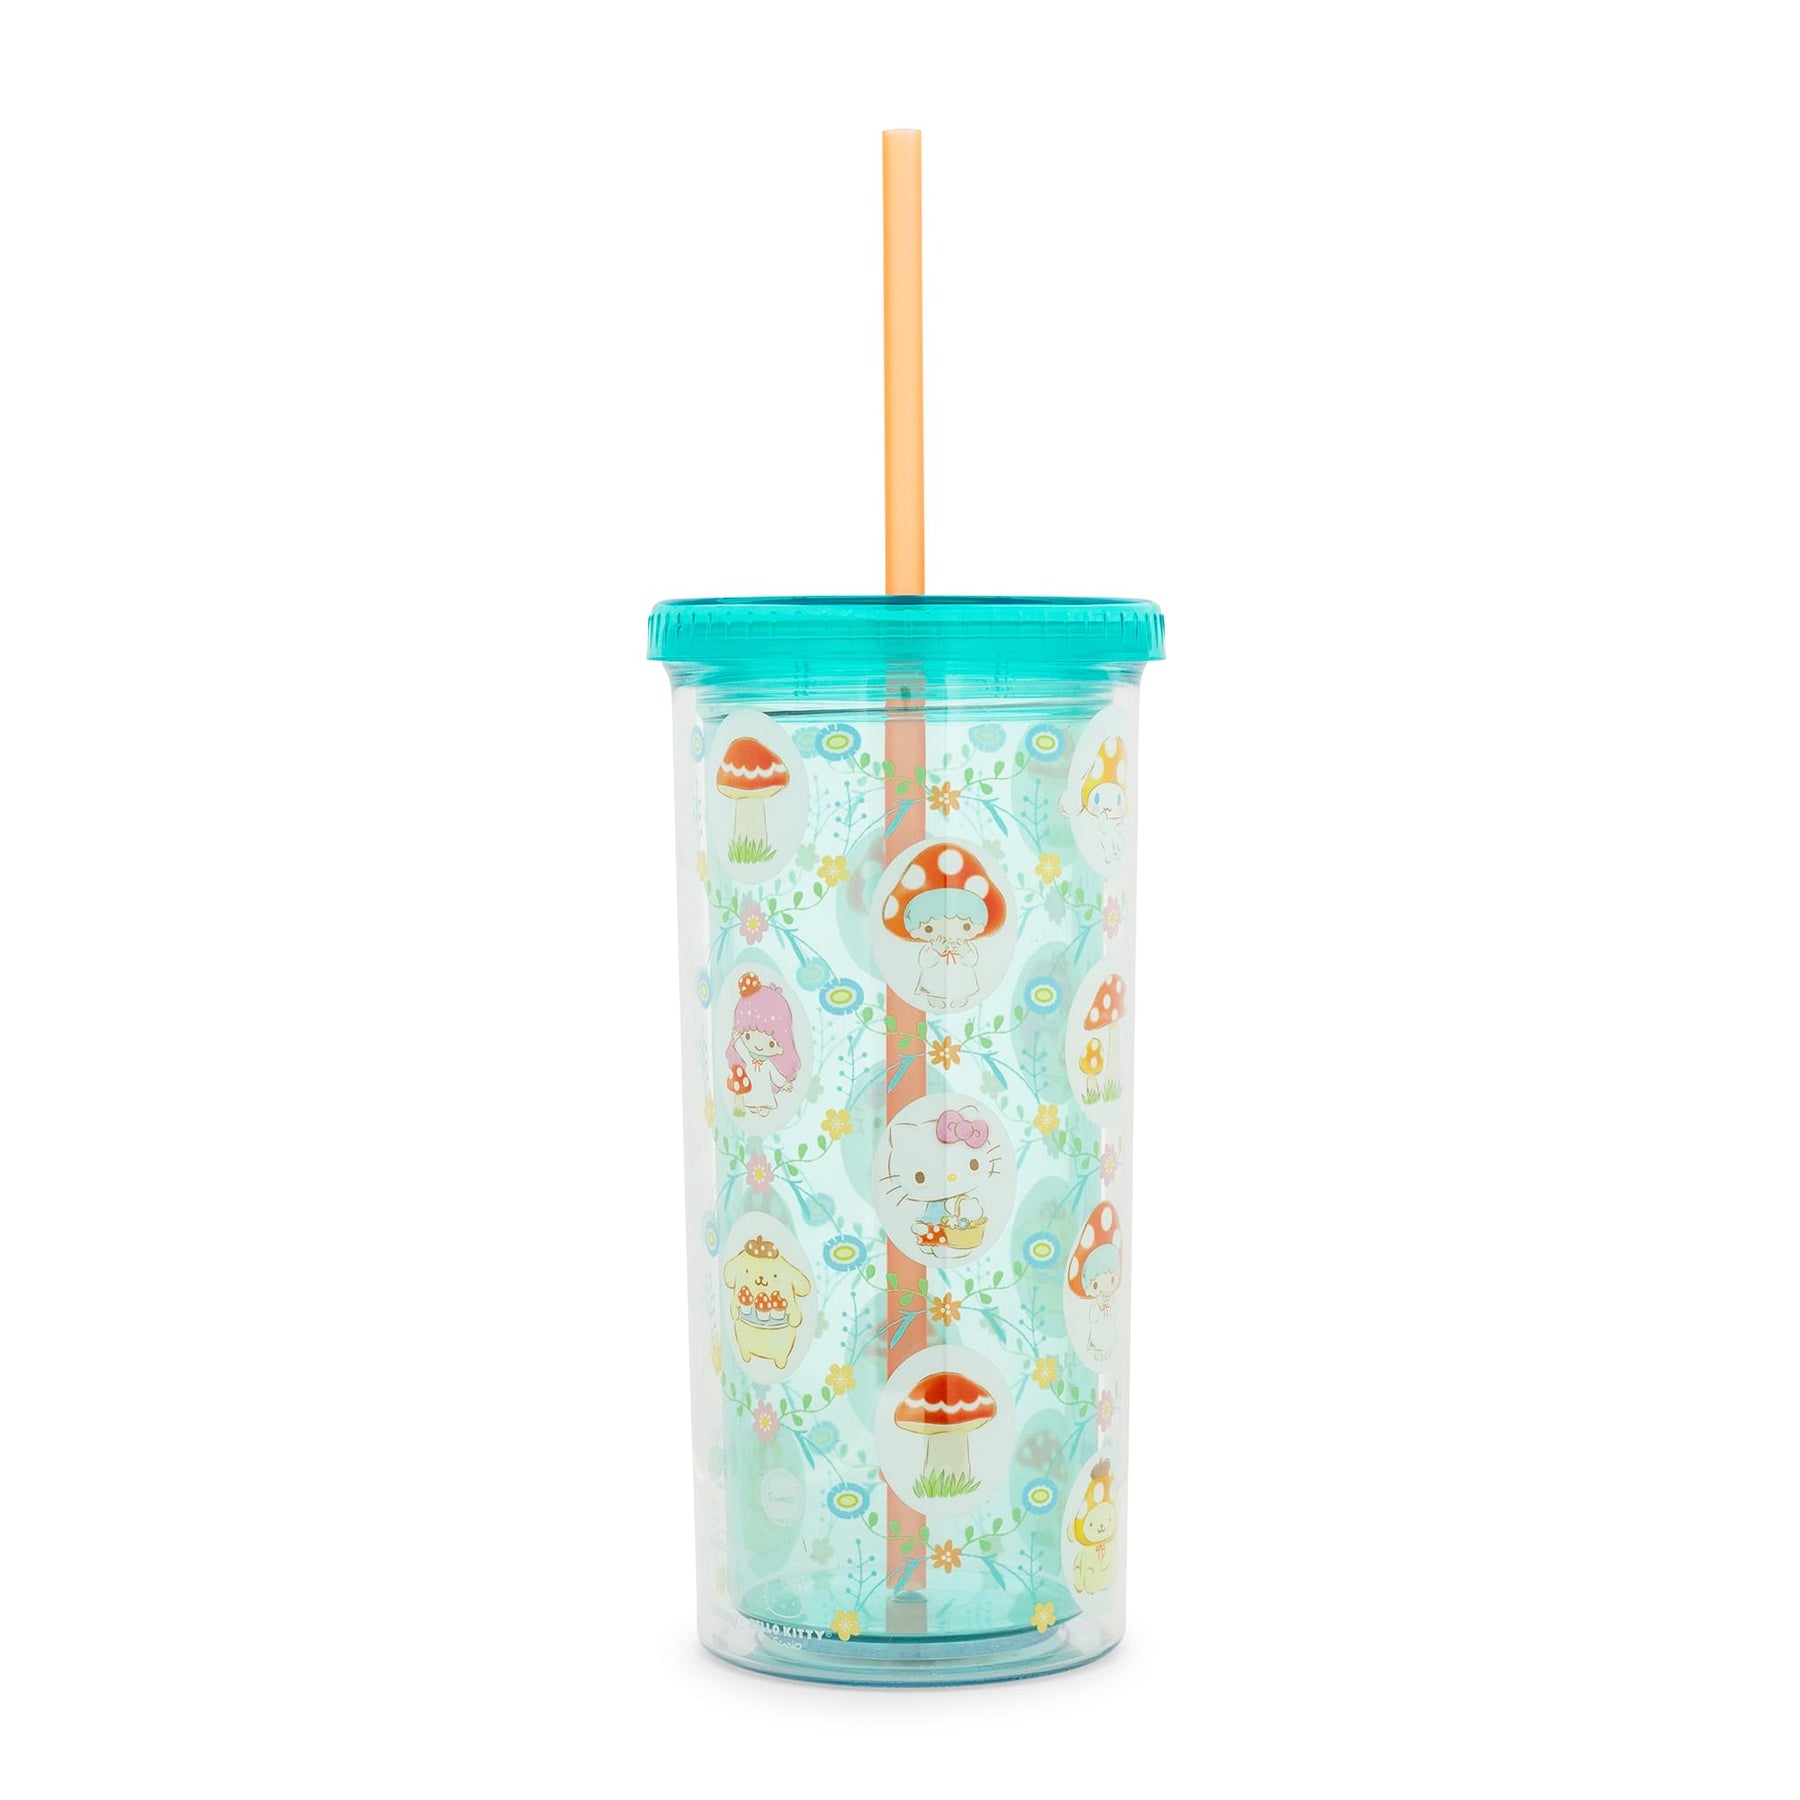 Sanrio Hello Kitty and Friends Mushroom Crew Carnival Cup | Holds 20 Ounces